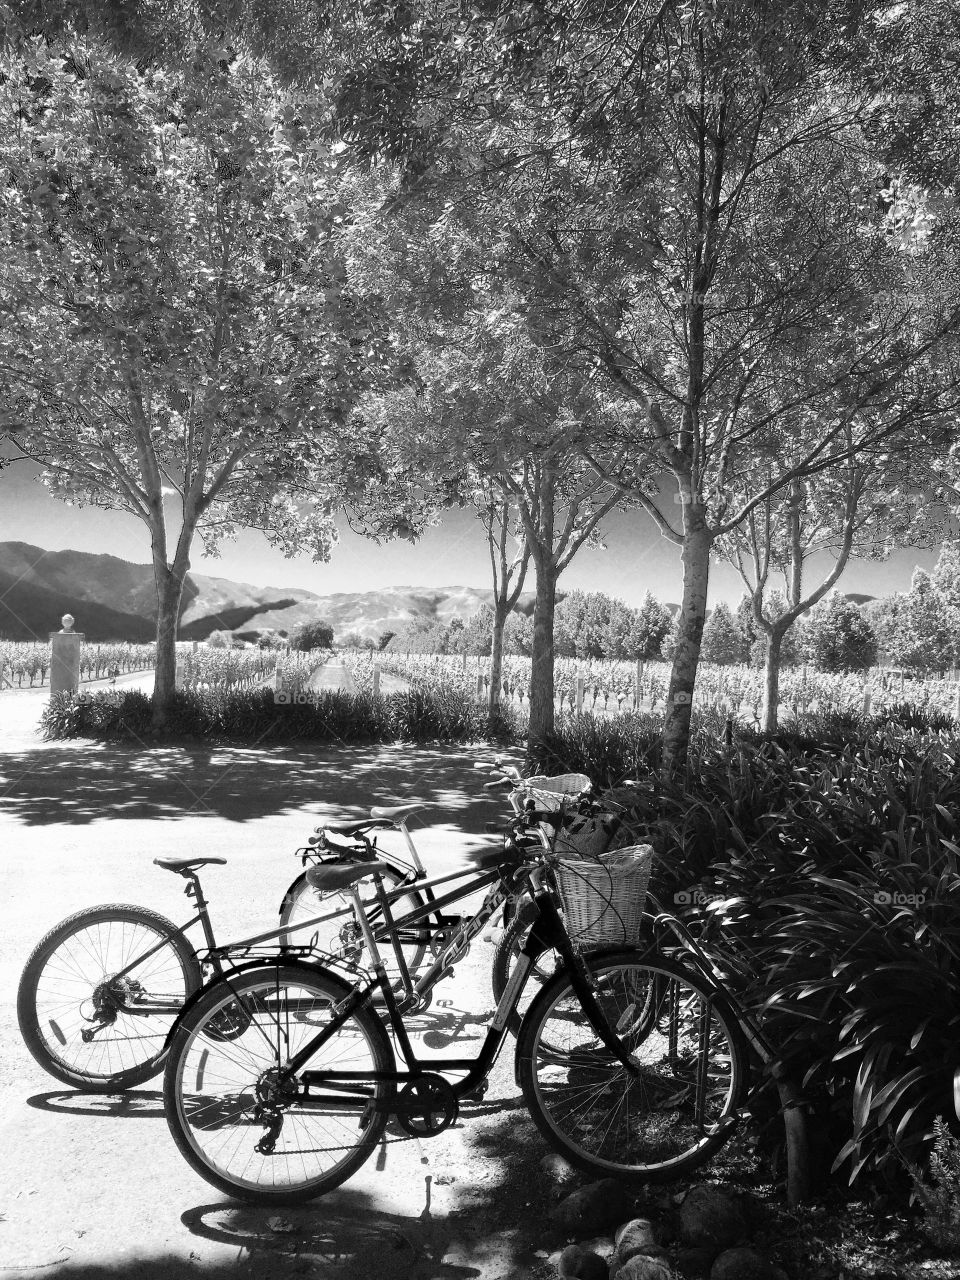 Bicycles in the shade